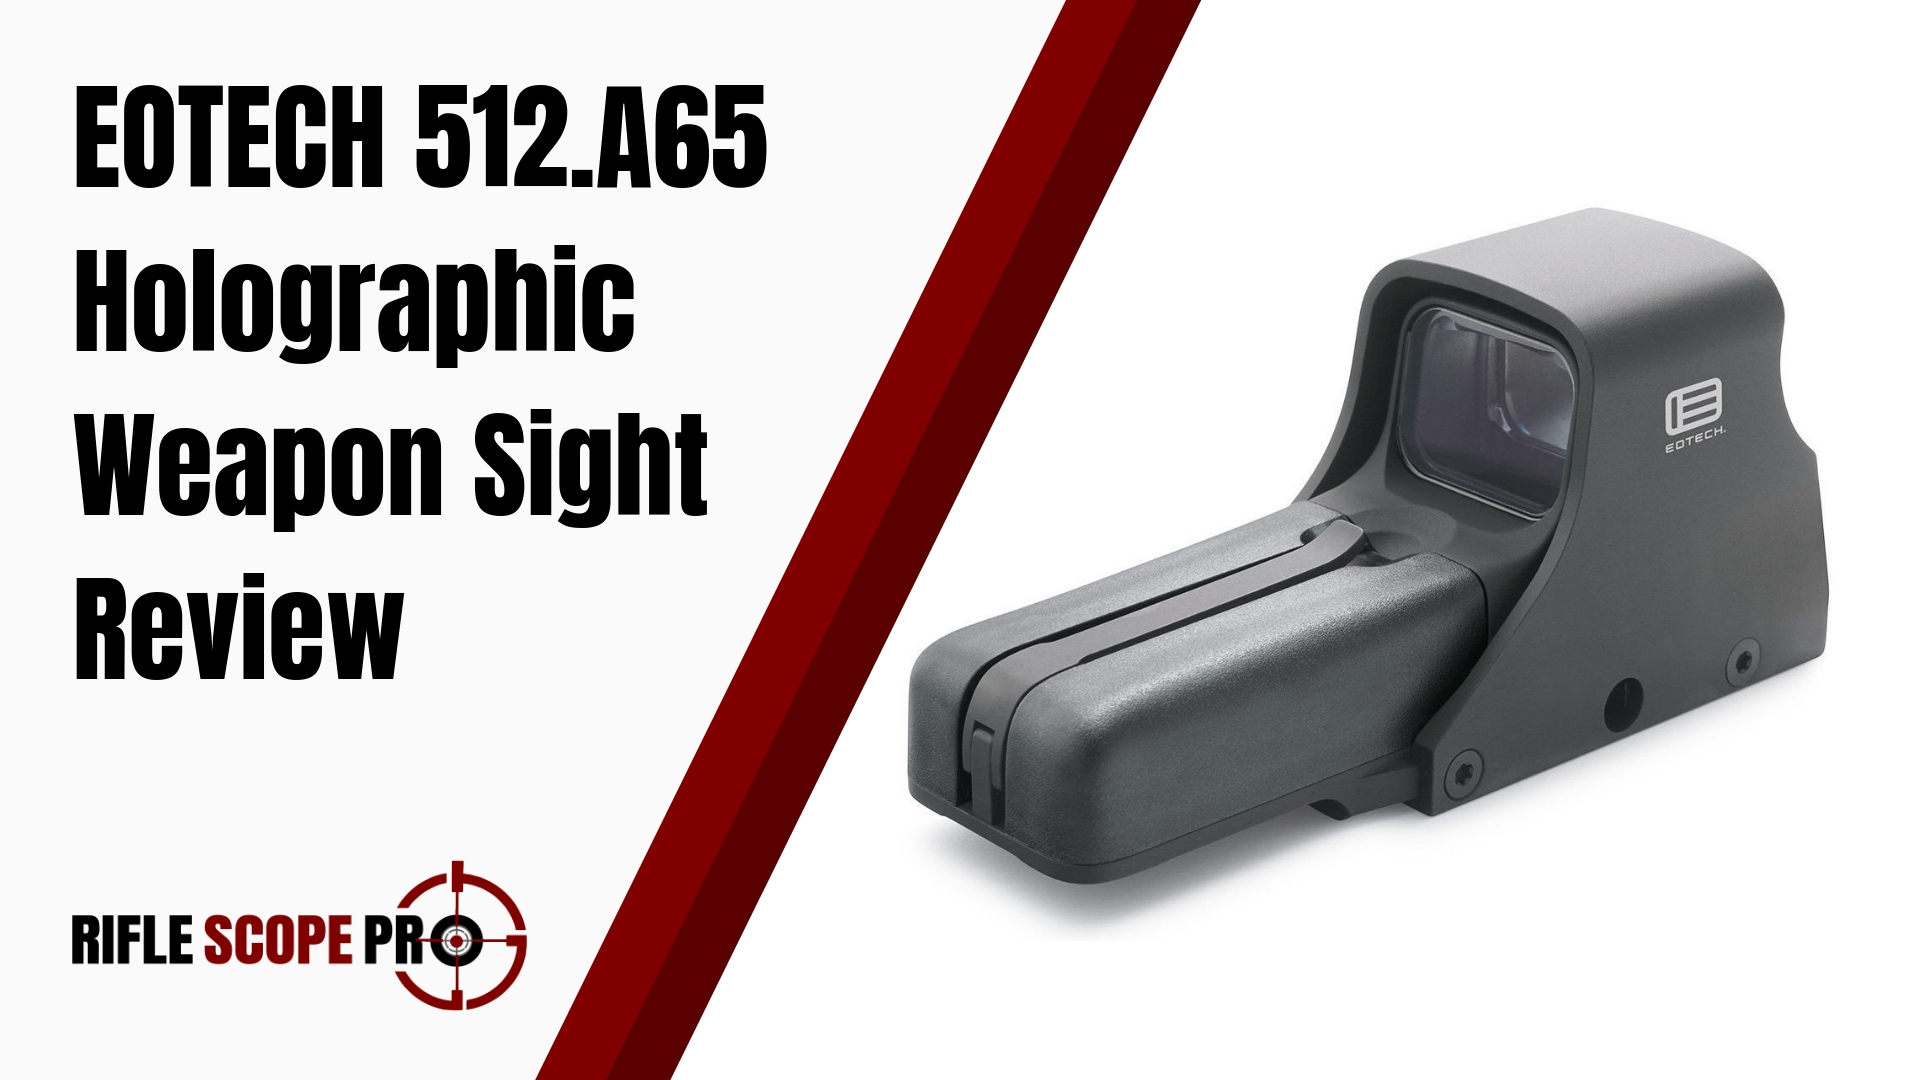 EOTECH 512 A65 Holographic Weapon Sight Review